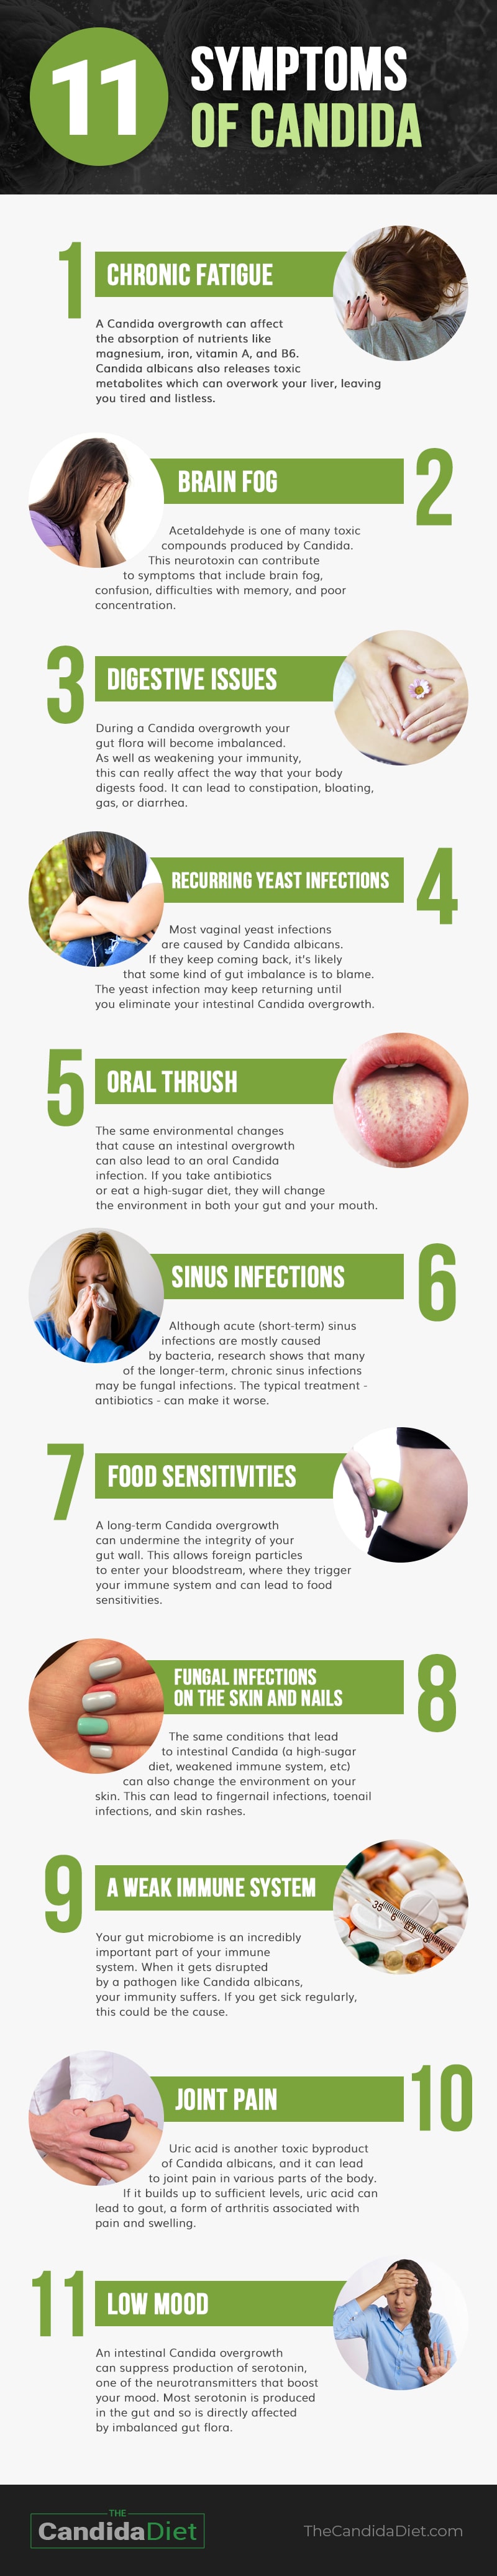 signs of candida overgrowth